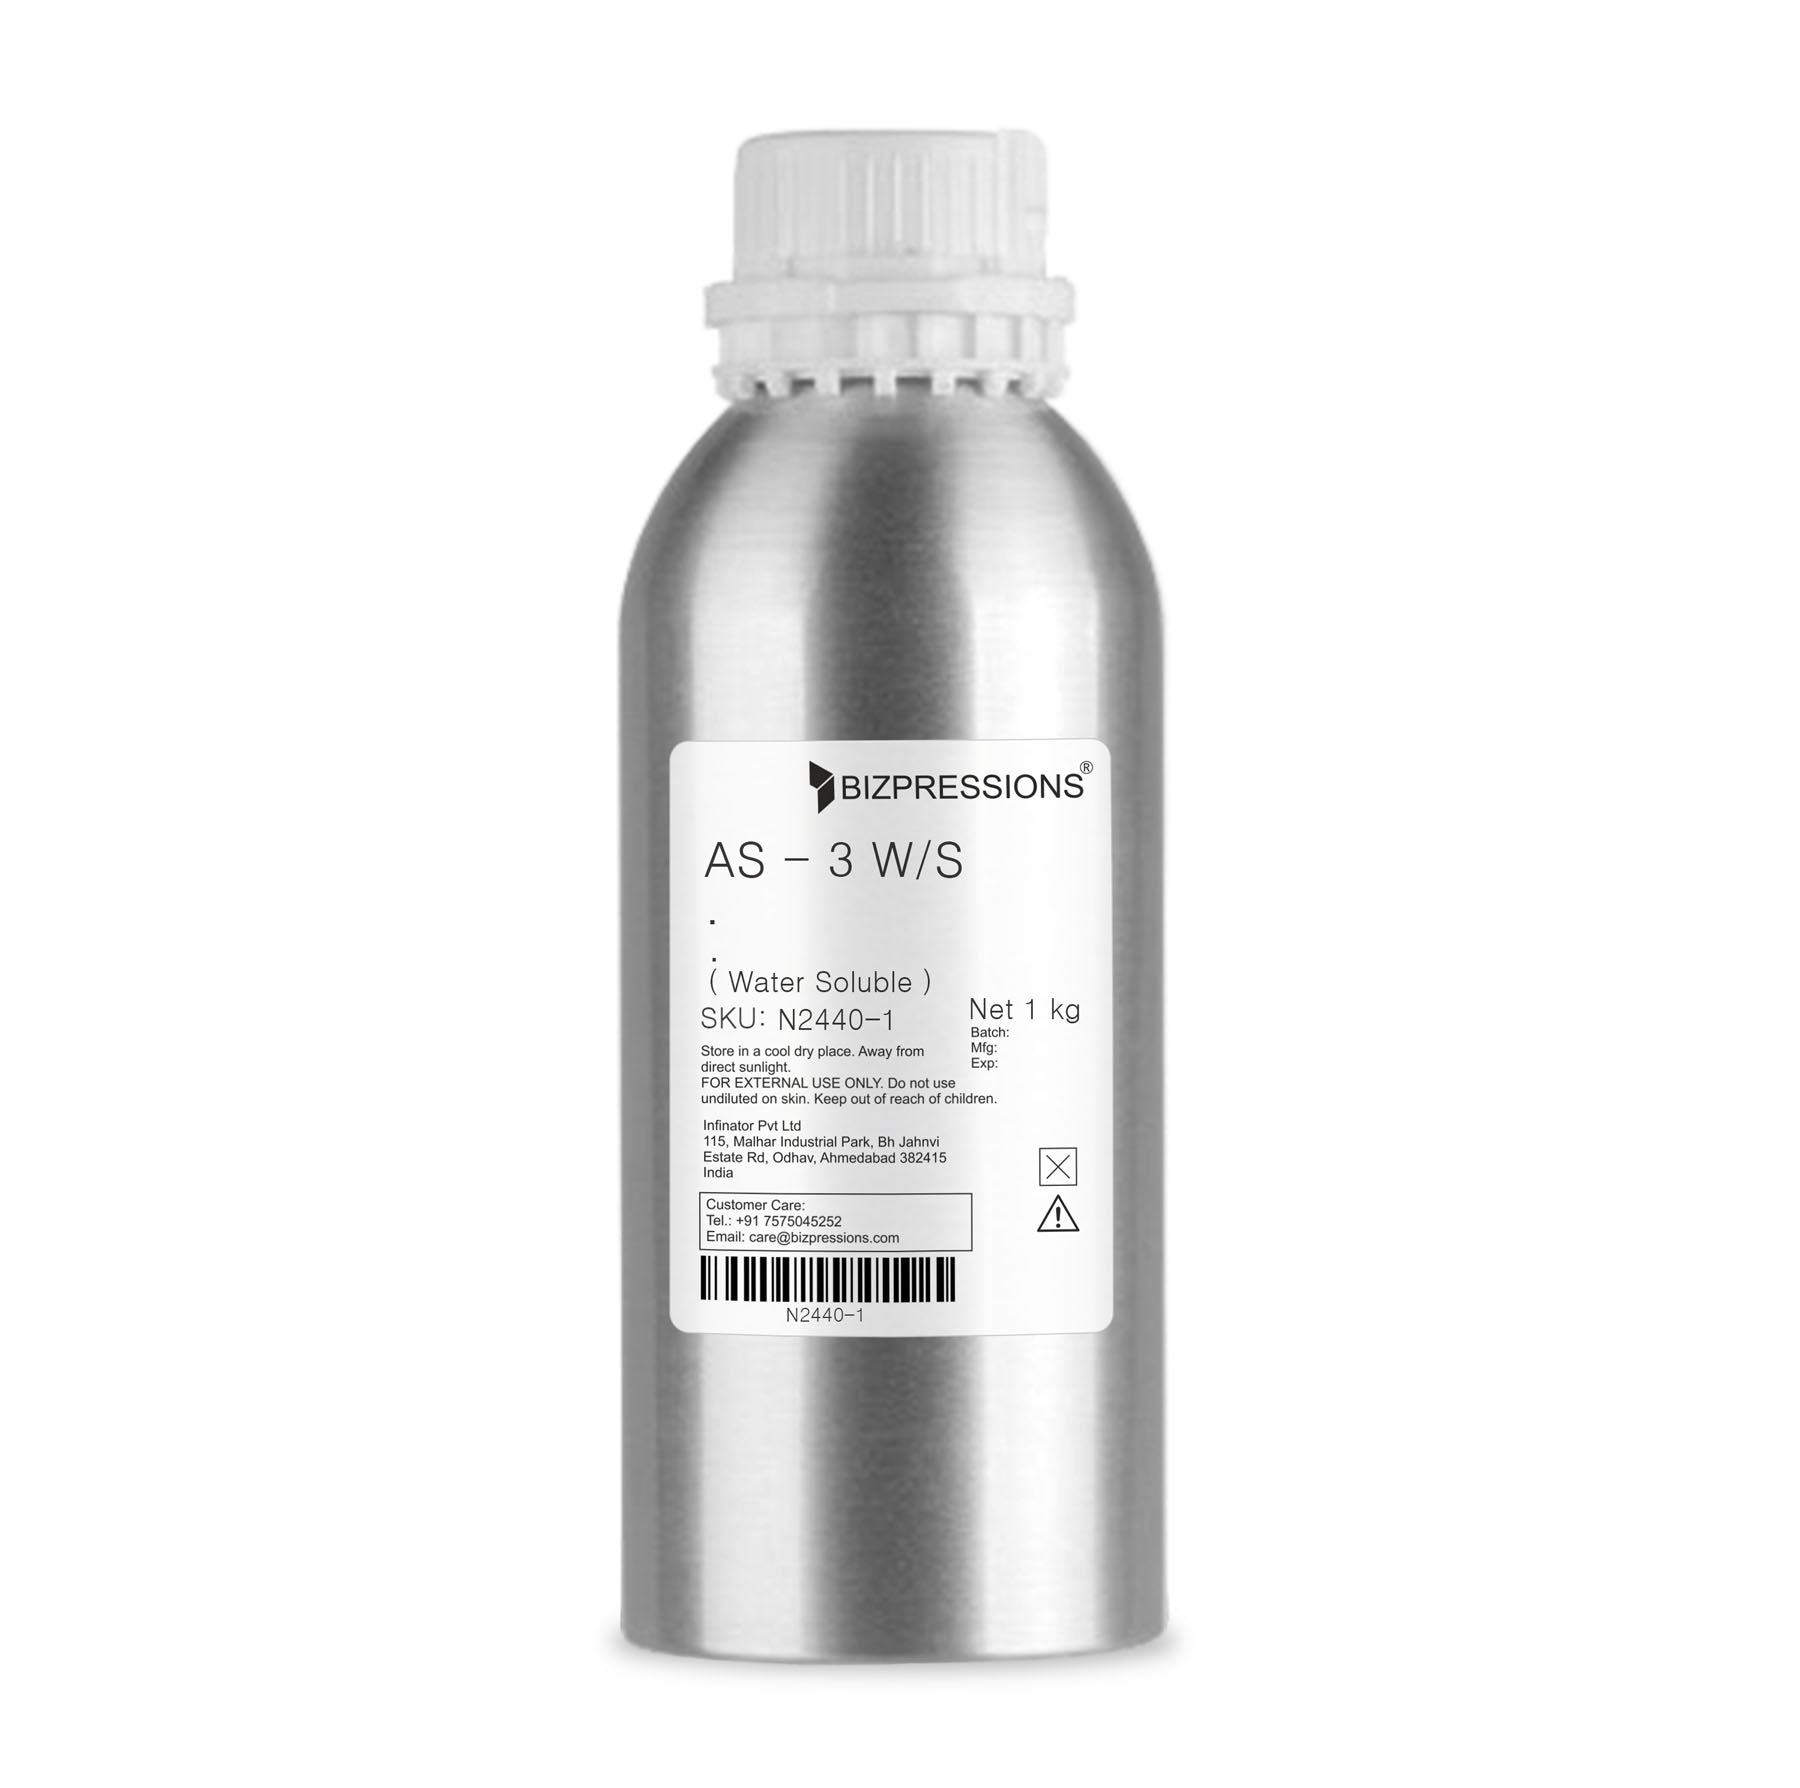 AS - 3 W/S - Fragrance ( Water Soluble ) - 1 kg